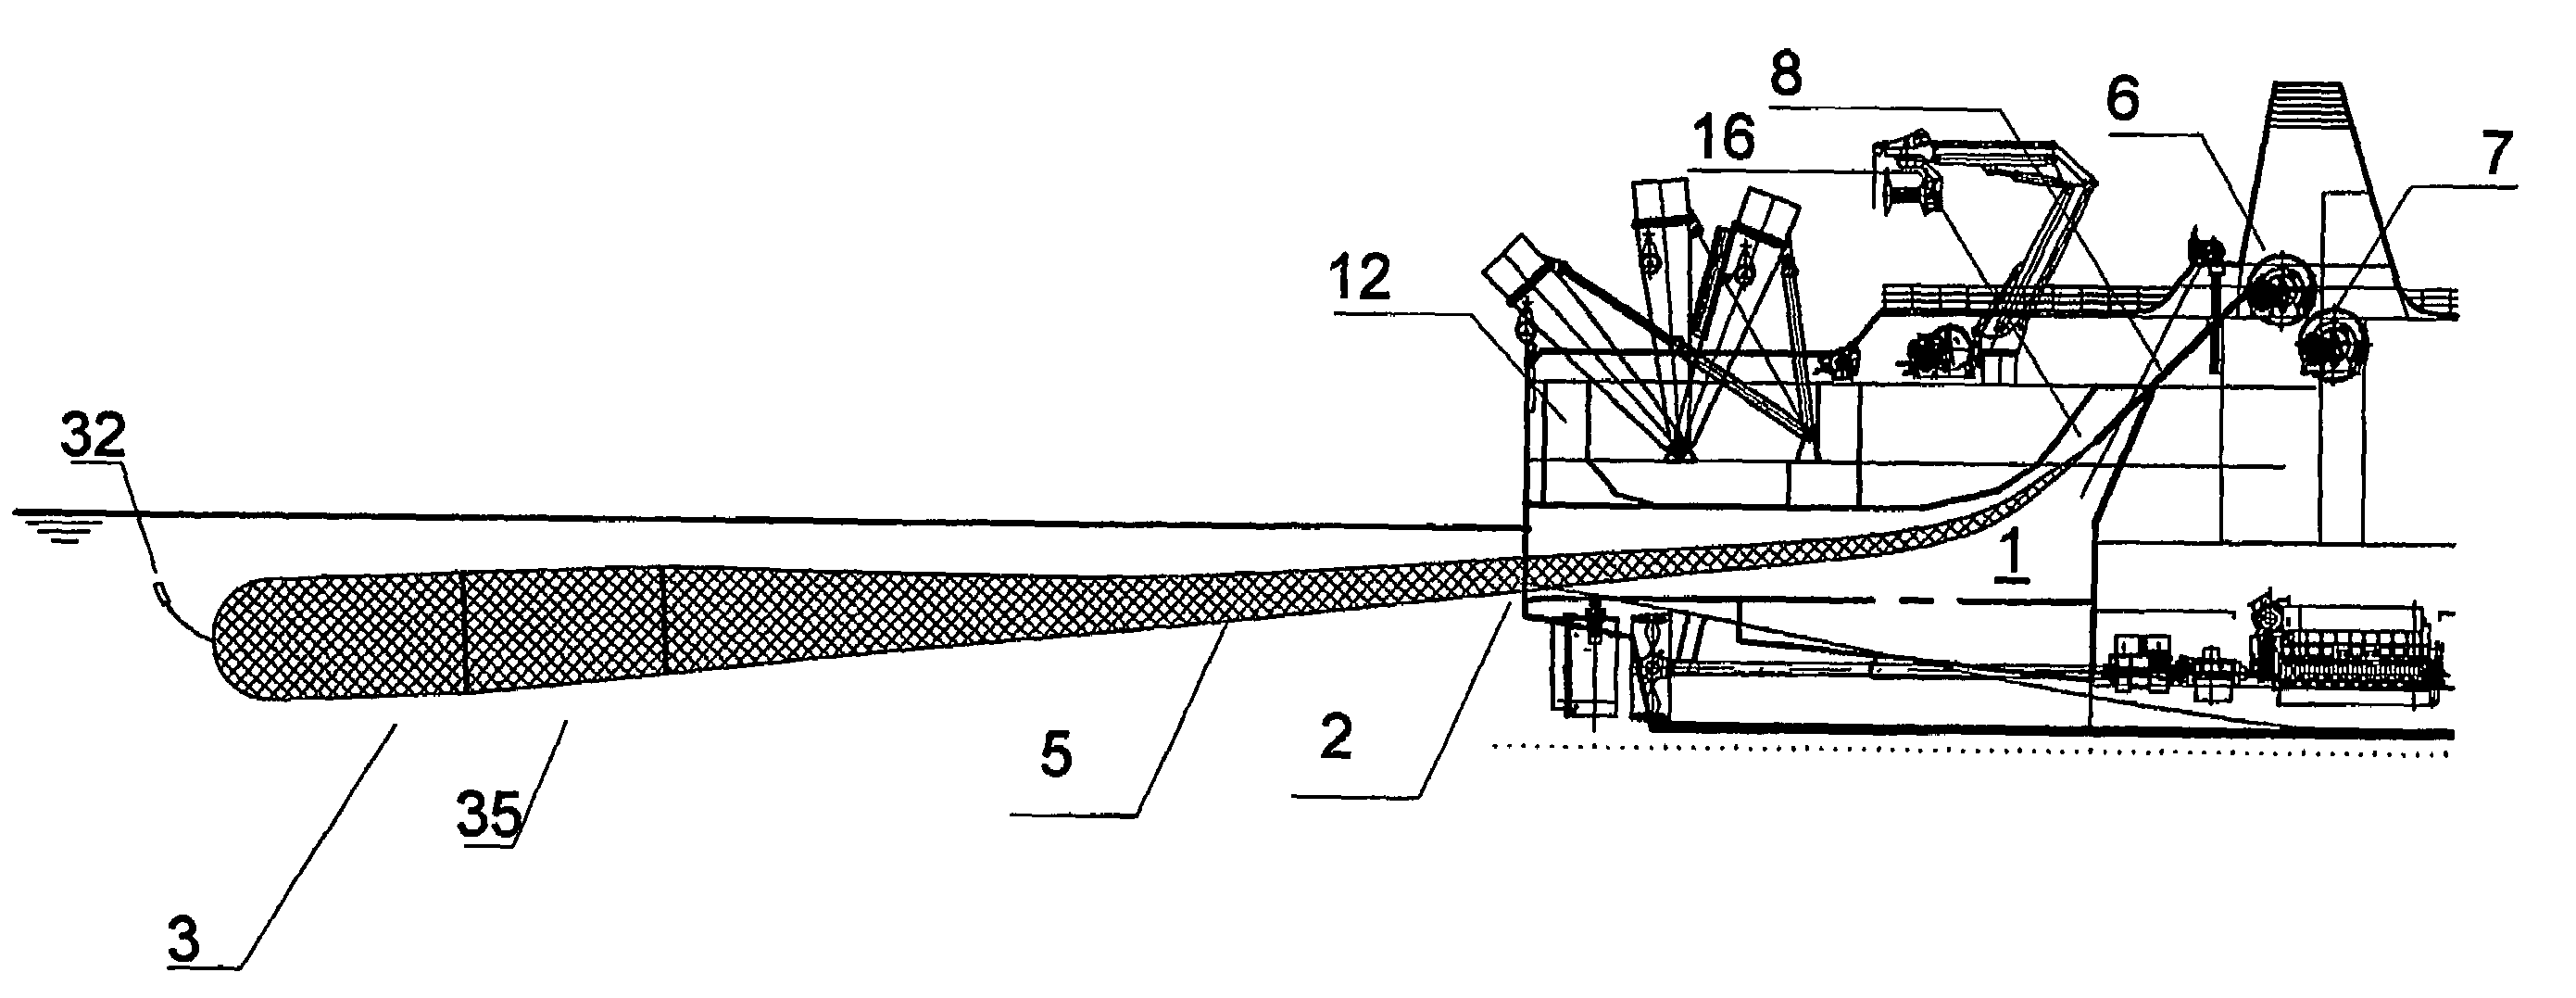 Trawling vessel with a lock chamber